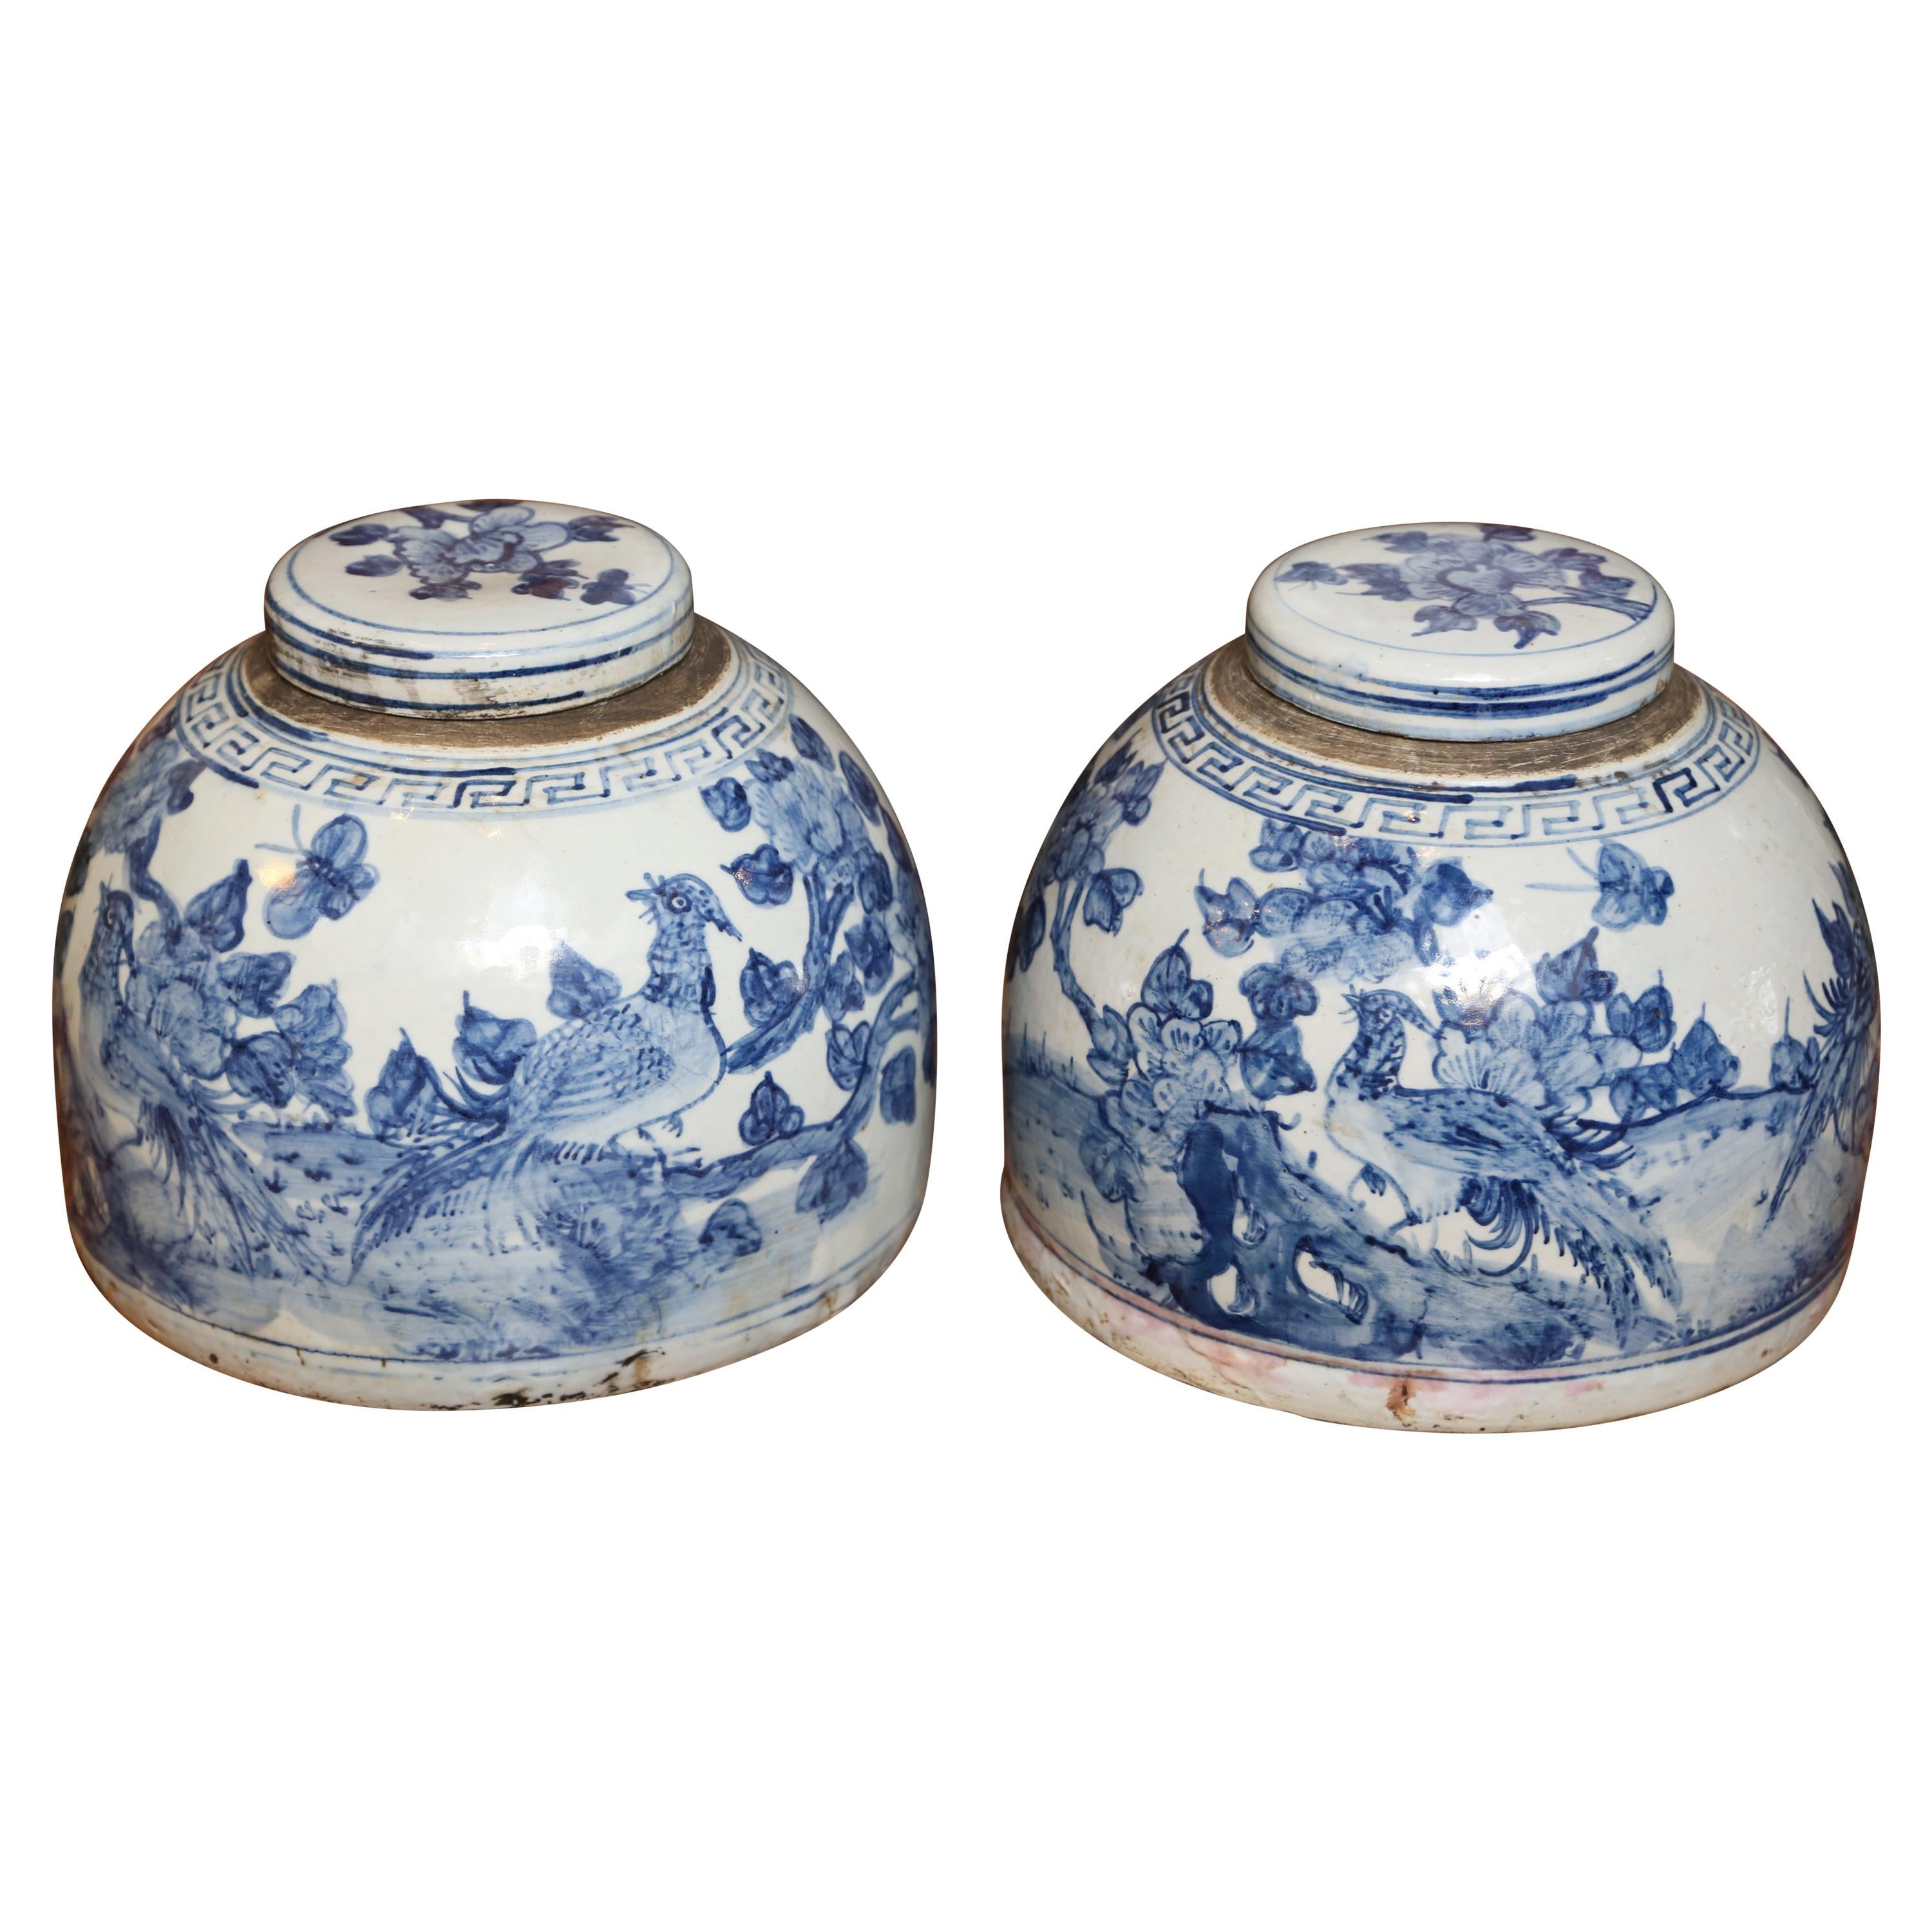 Pair of Chinese Blue and White Jars with Lids